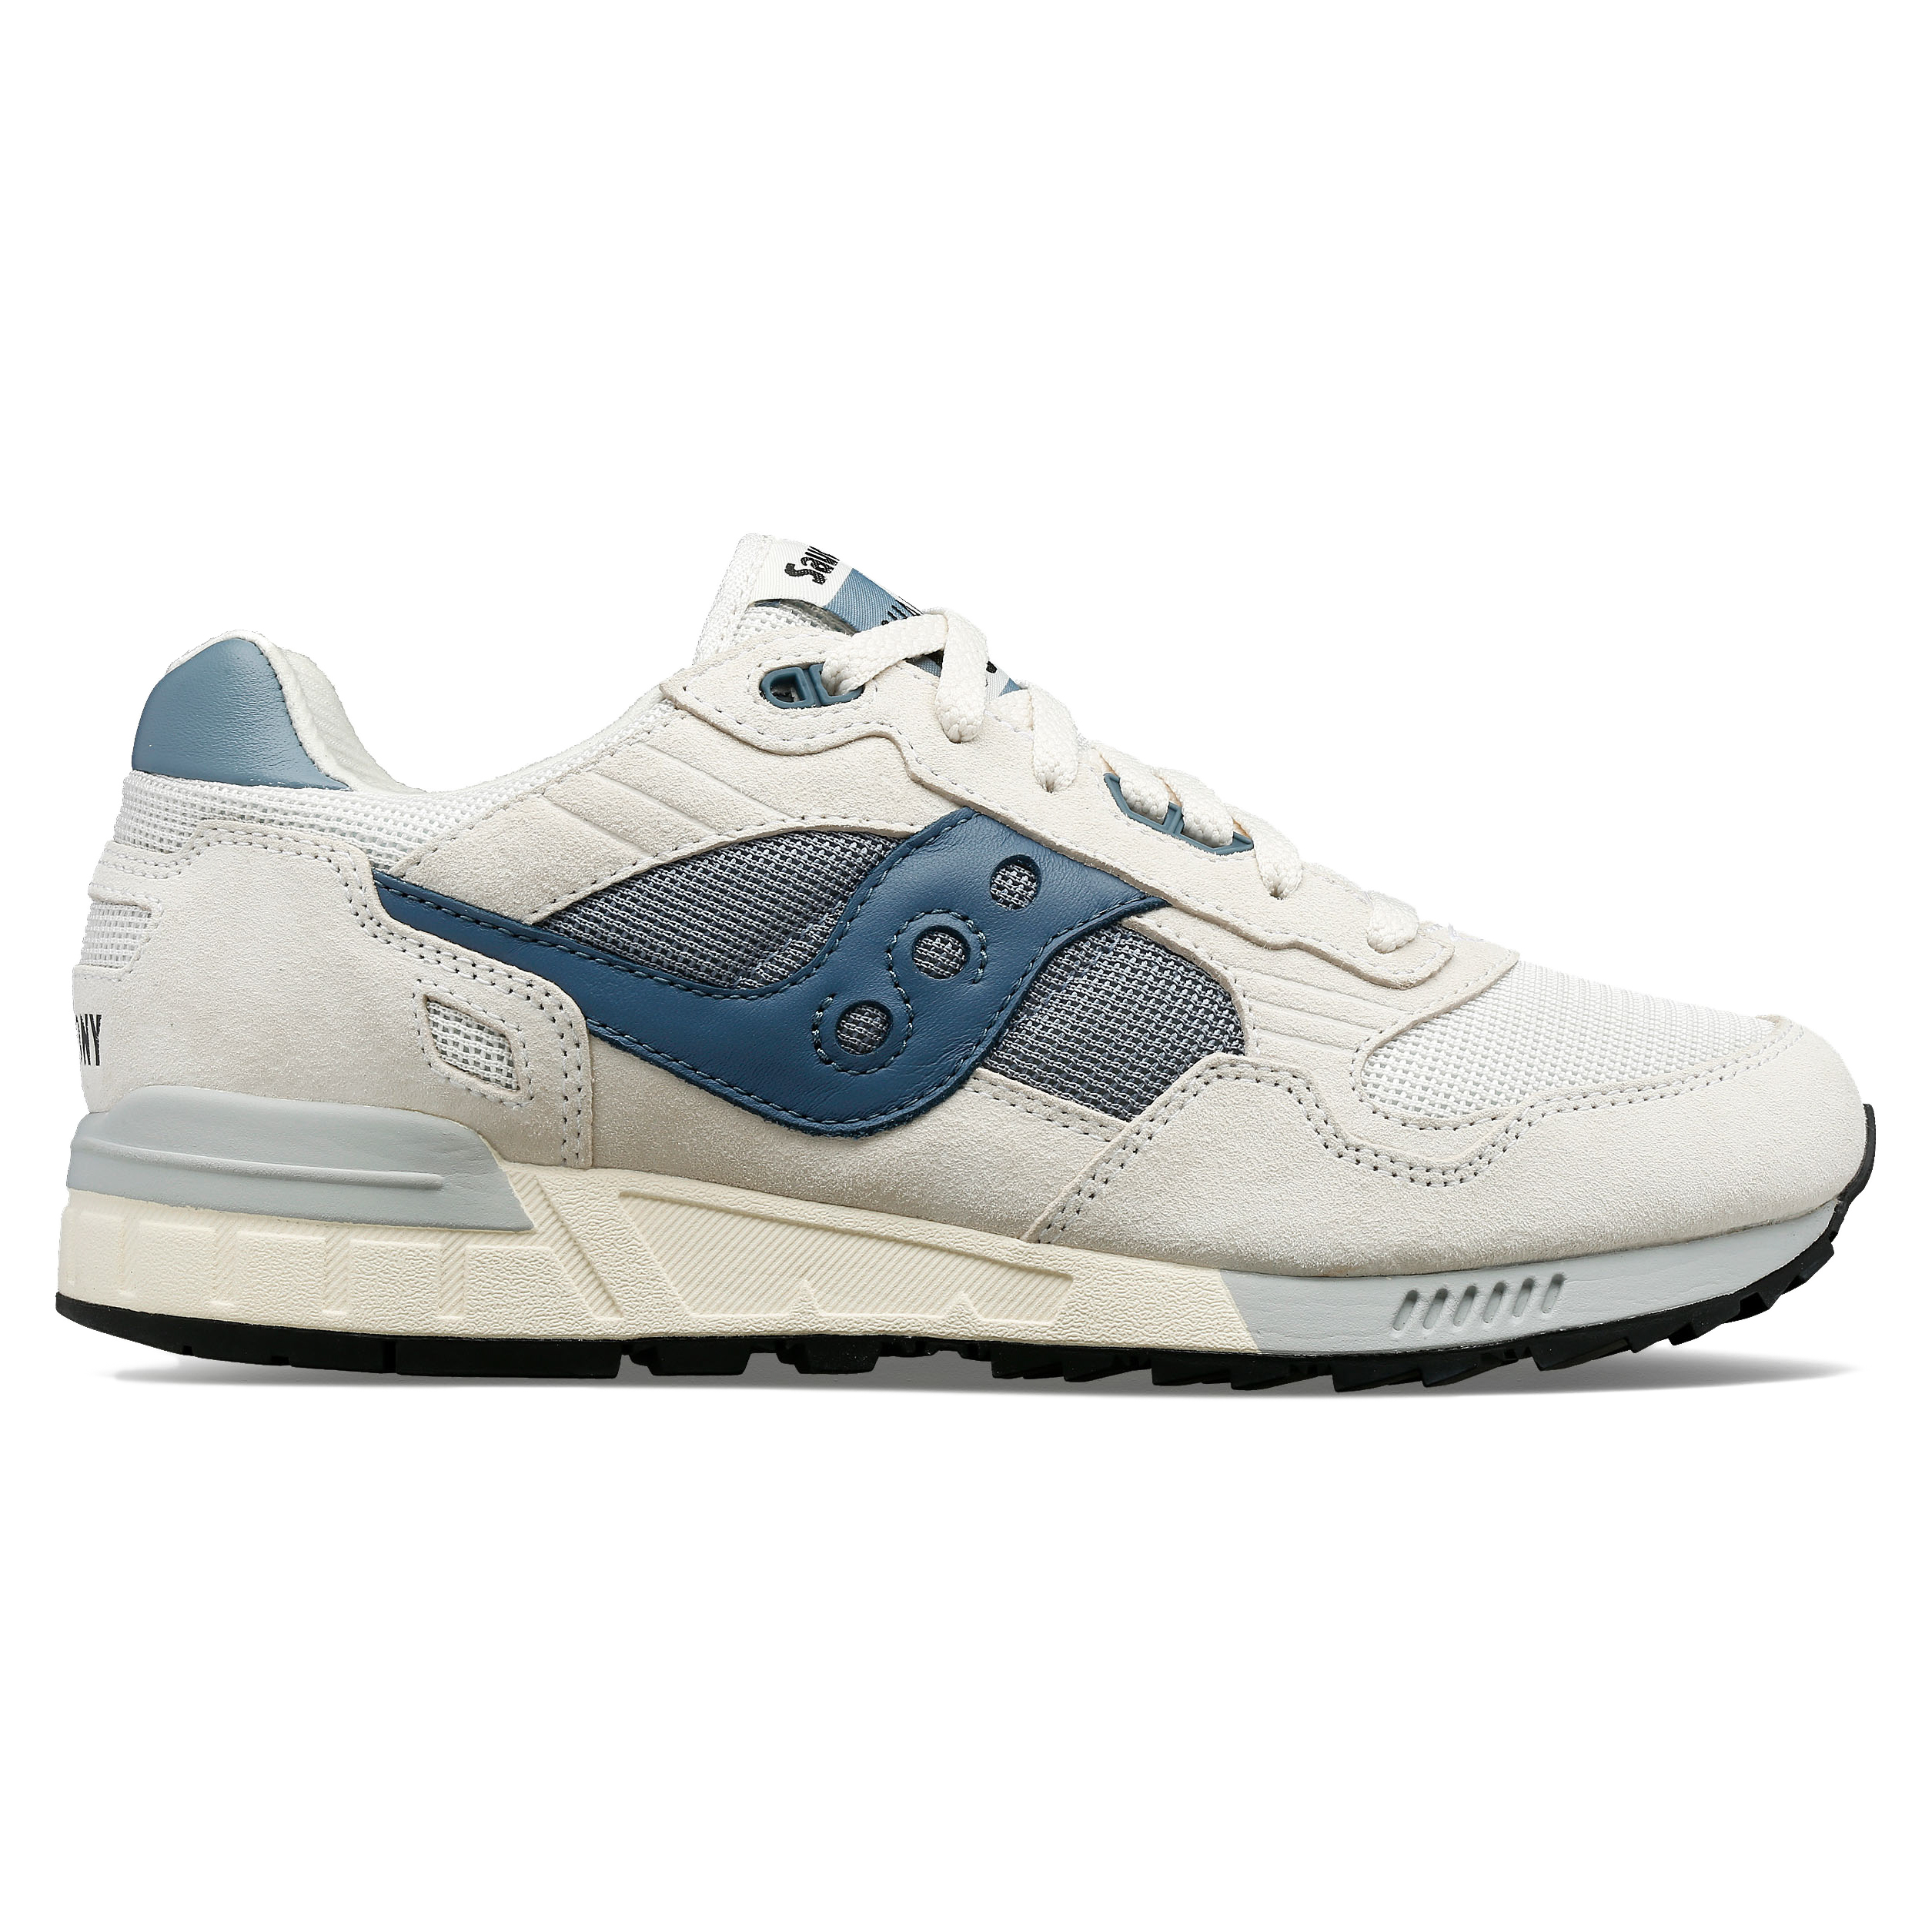 Saucony Shadow 5000 Sneaker - White/Blue | Casual Sneakers | Huckberry